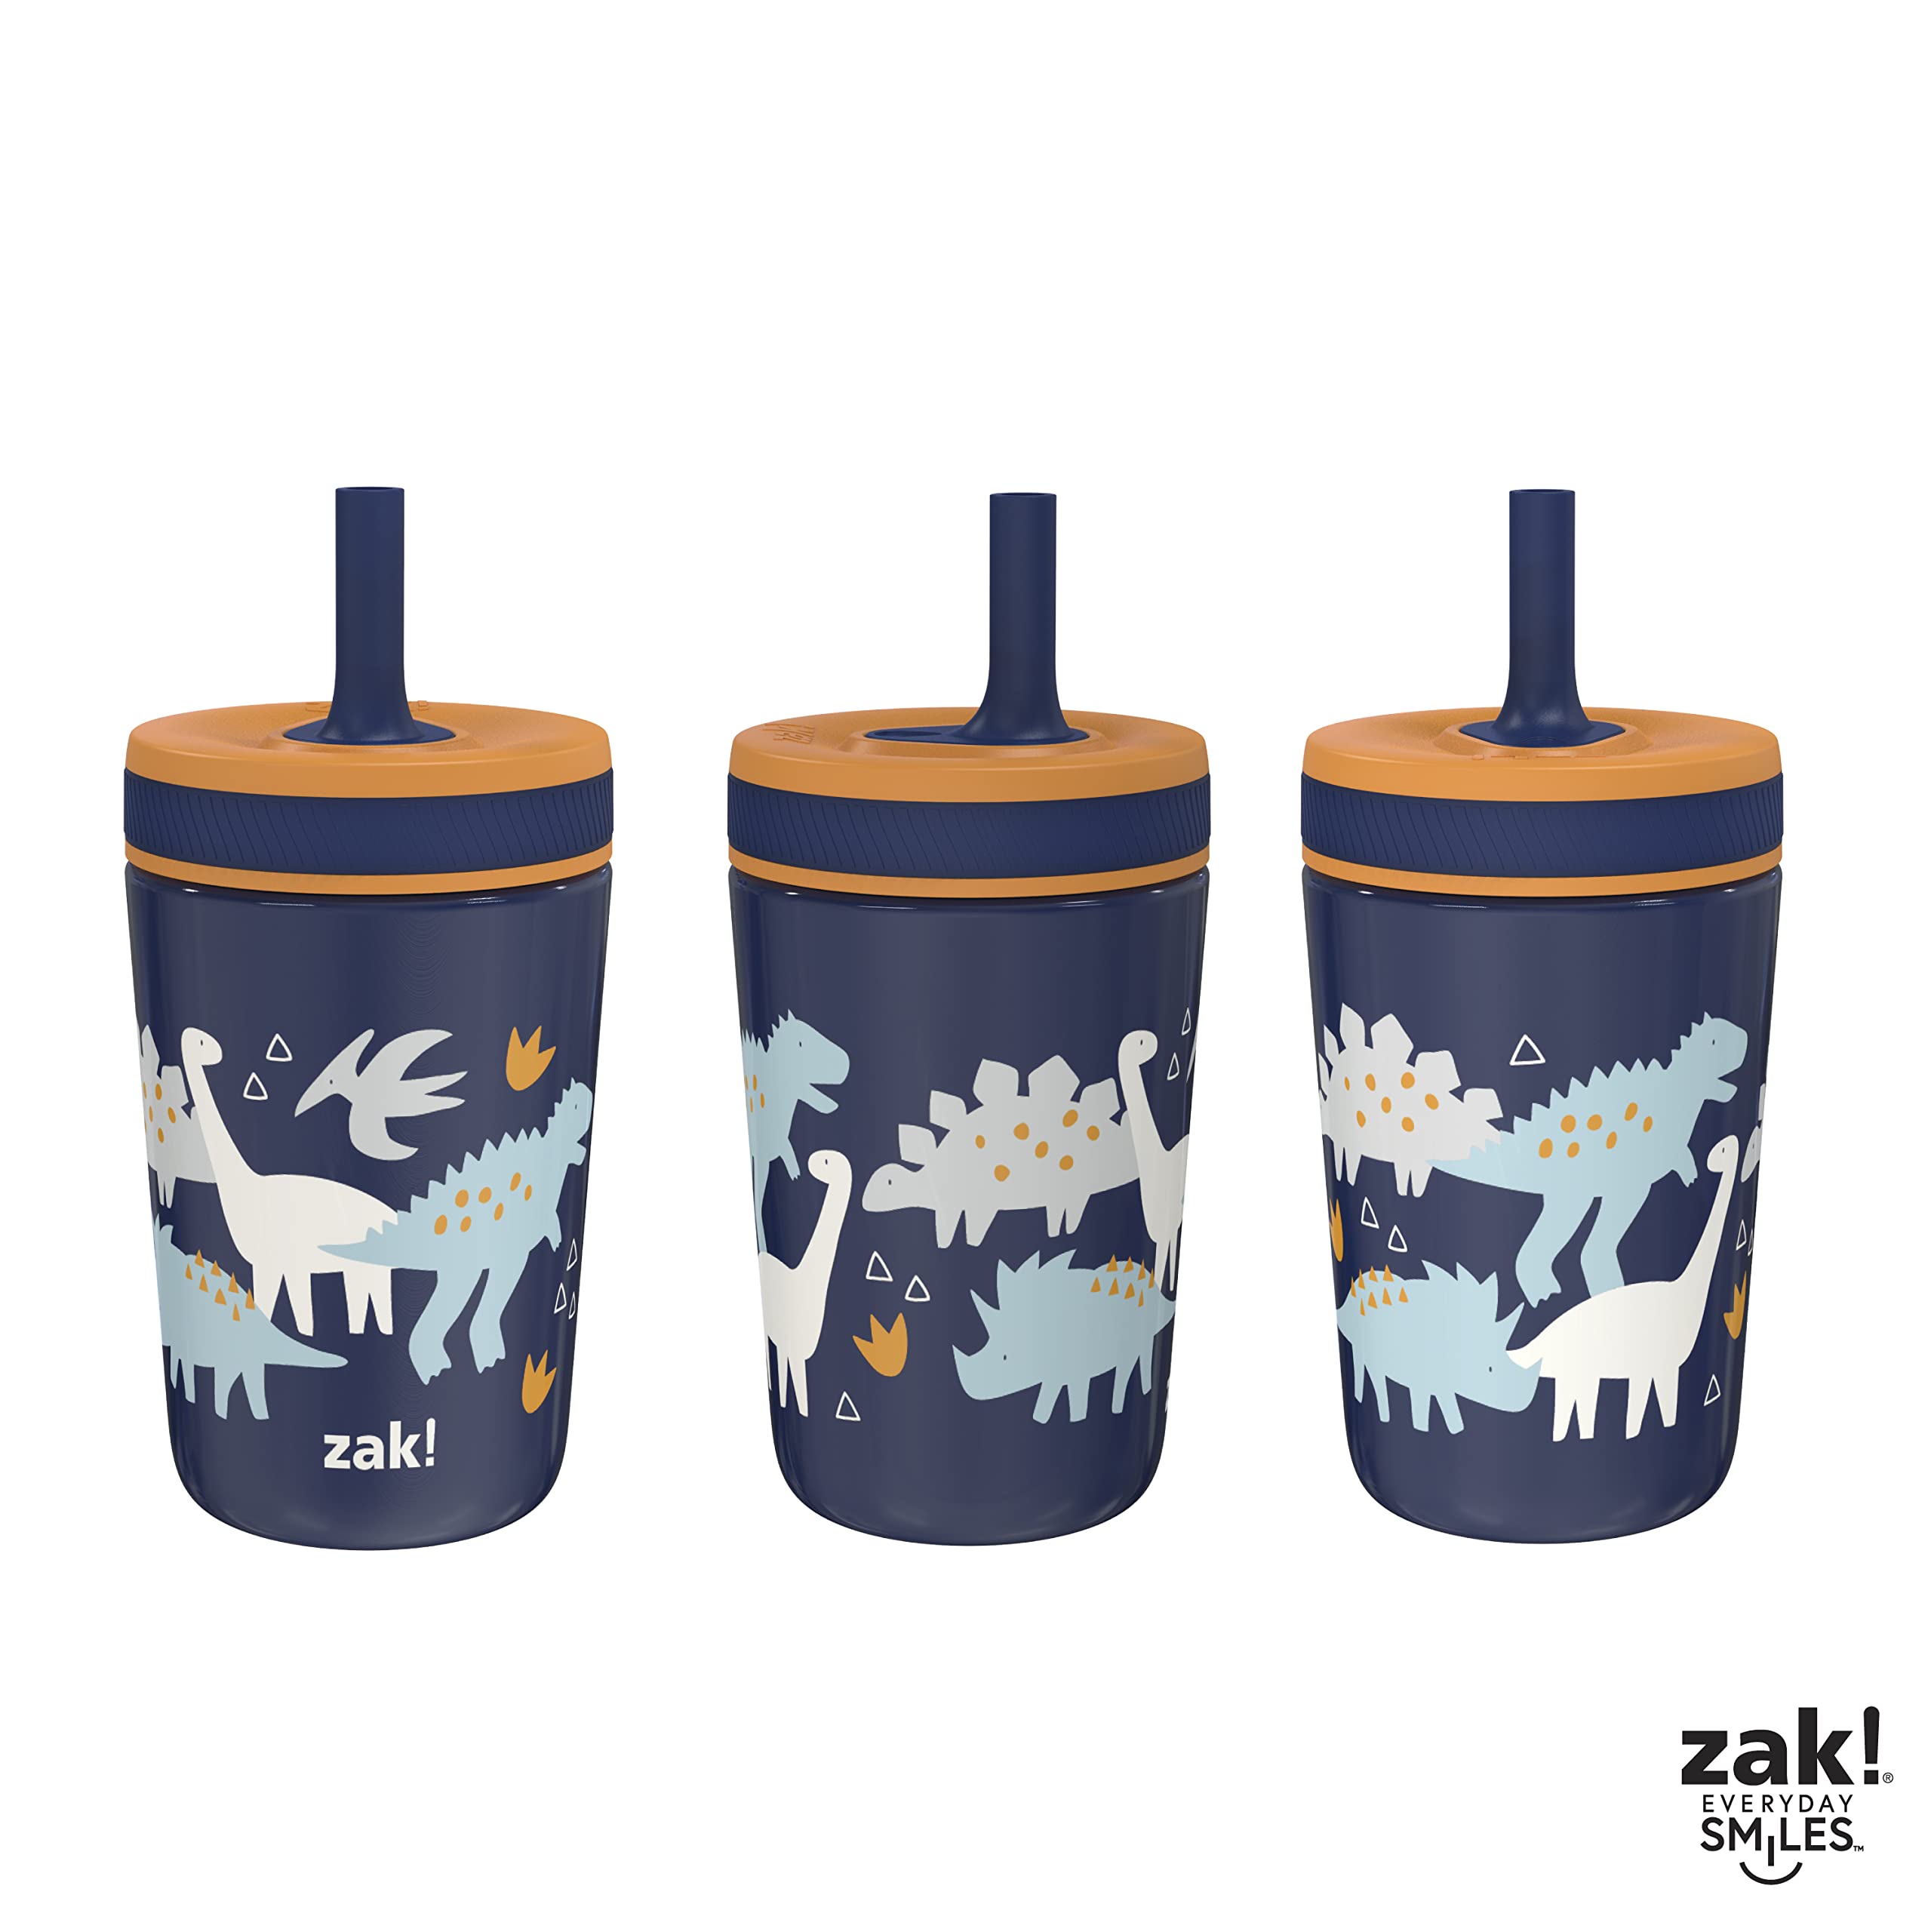 Zak Designs Kelso Toddler Cups For Travel or At Home, 12oz Vacuum Insulated Stainless Steel Sippy Cup With Leak-Proof Design is Perfect For Kids (Zaksaurus)